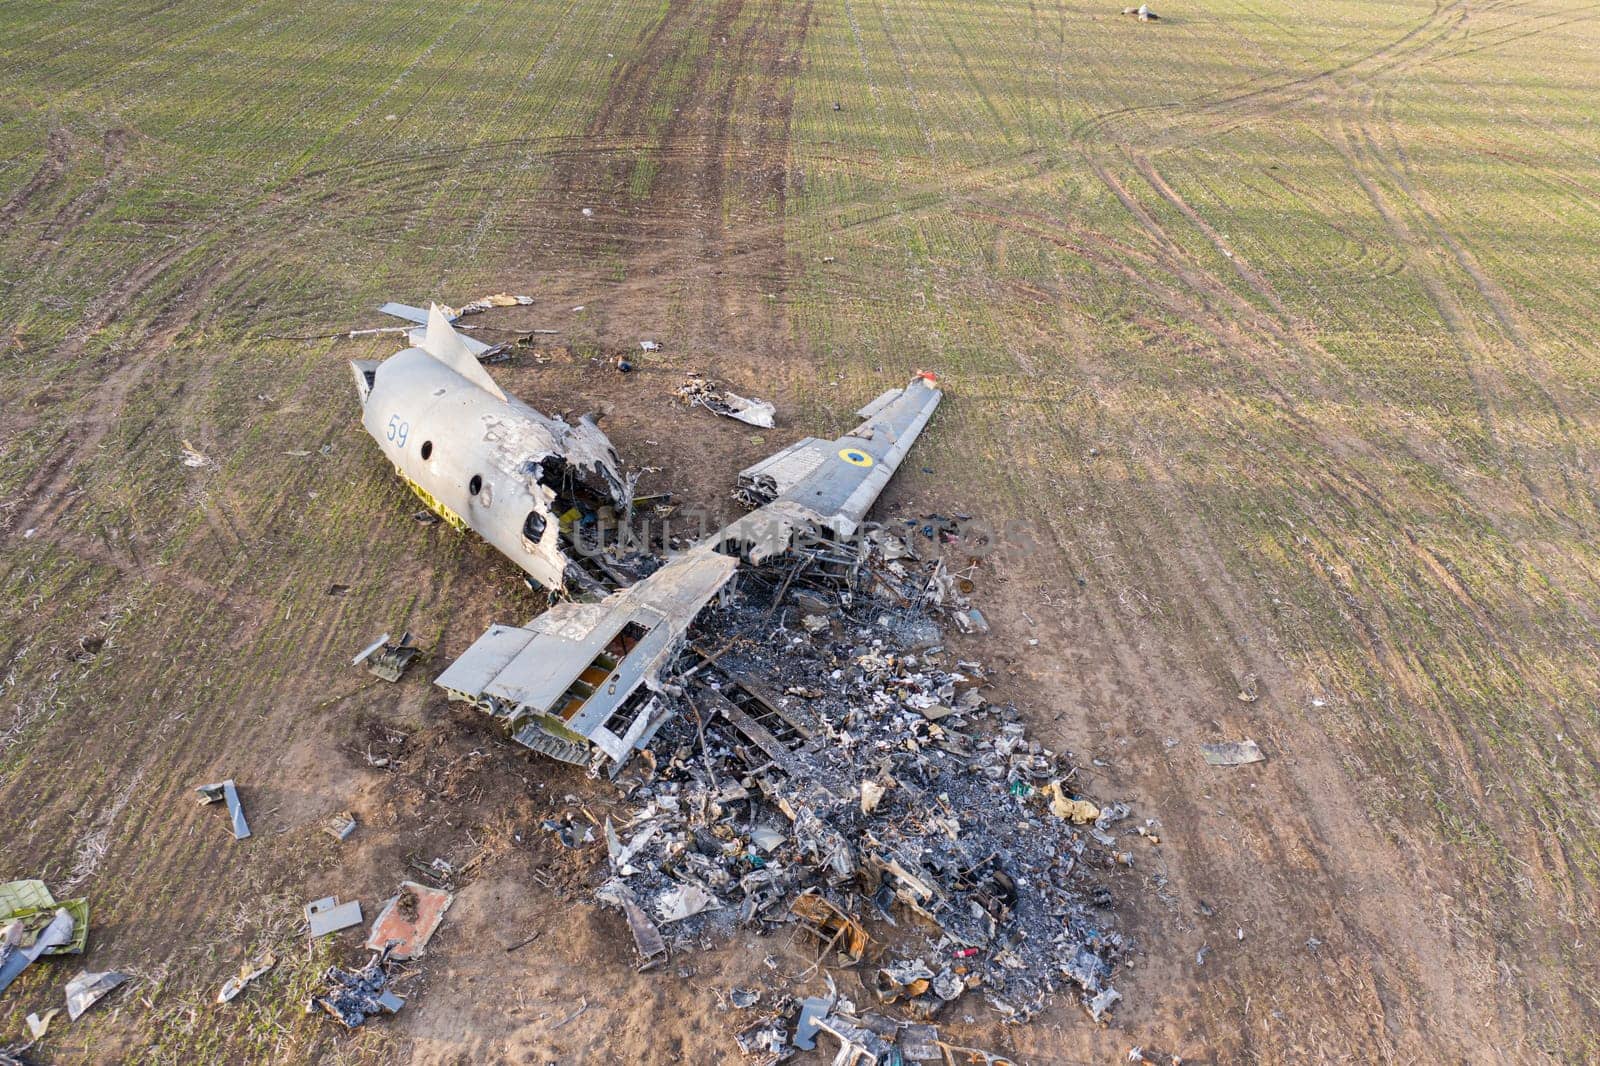 In this picture, an AN-26 aircraft can be seen lying on a field in Ukraine after an accident. The aircraft appears to have suffered significant damage, with parts scattered around the wreckage. The image conveys the severity of the accident and the potential dangers of aviation during the war